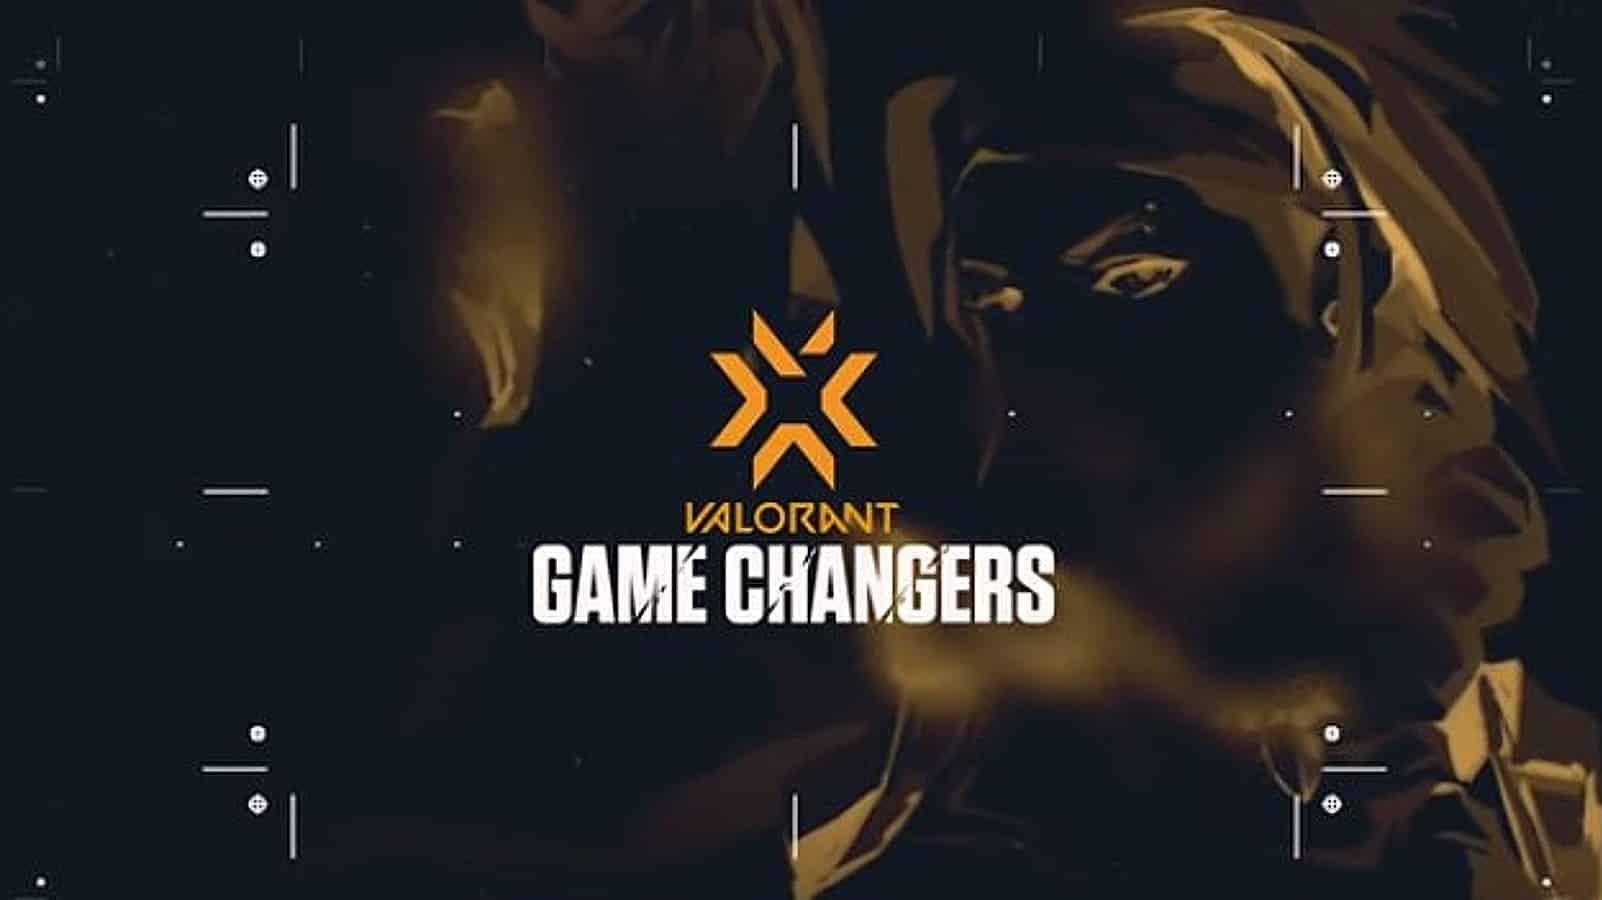 Valorant game changers poster with skye in gold on a black background